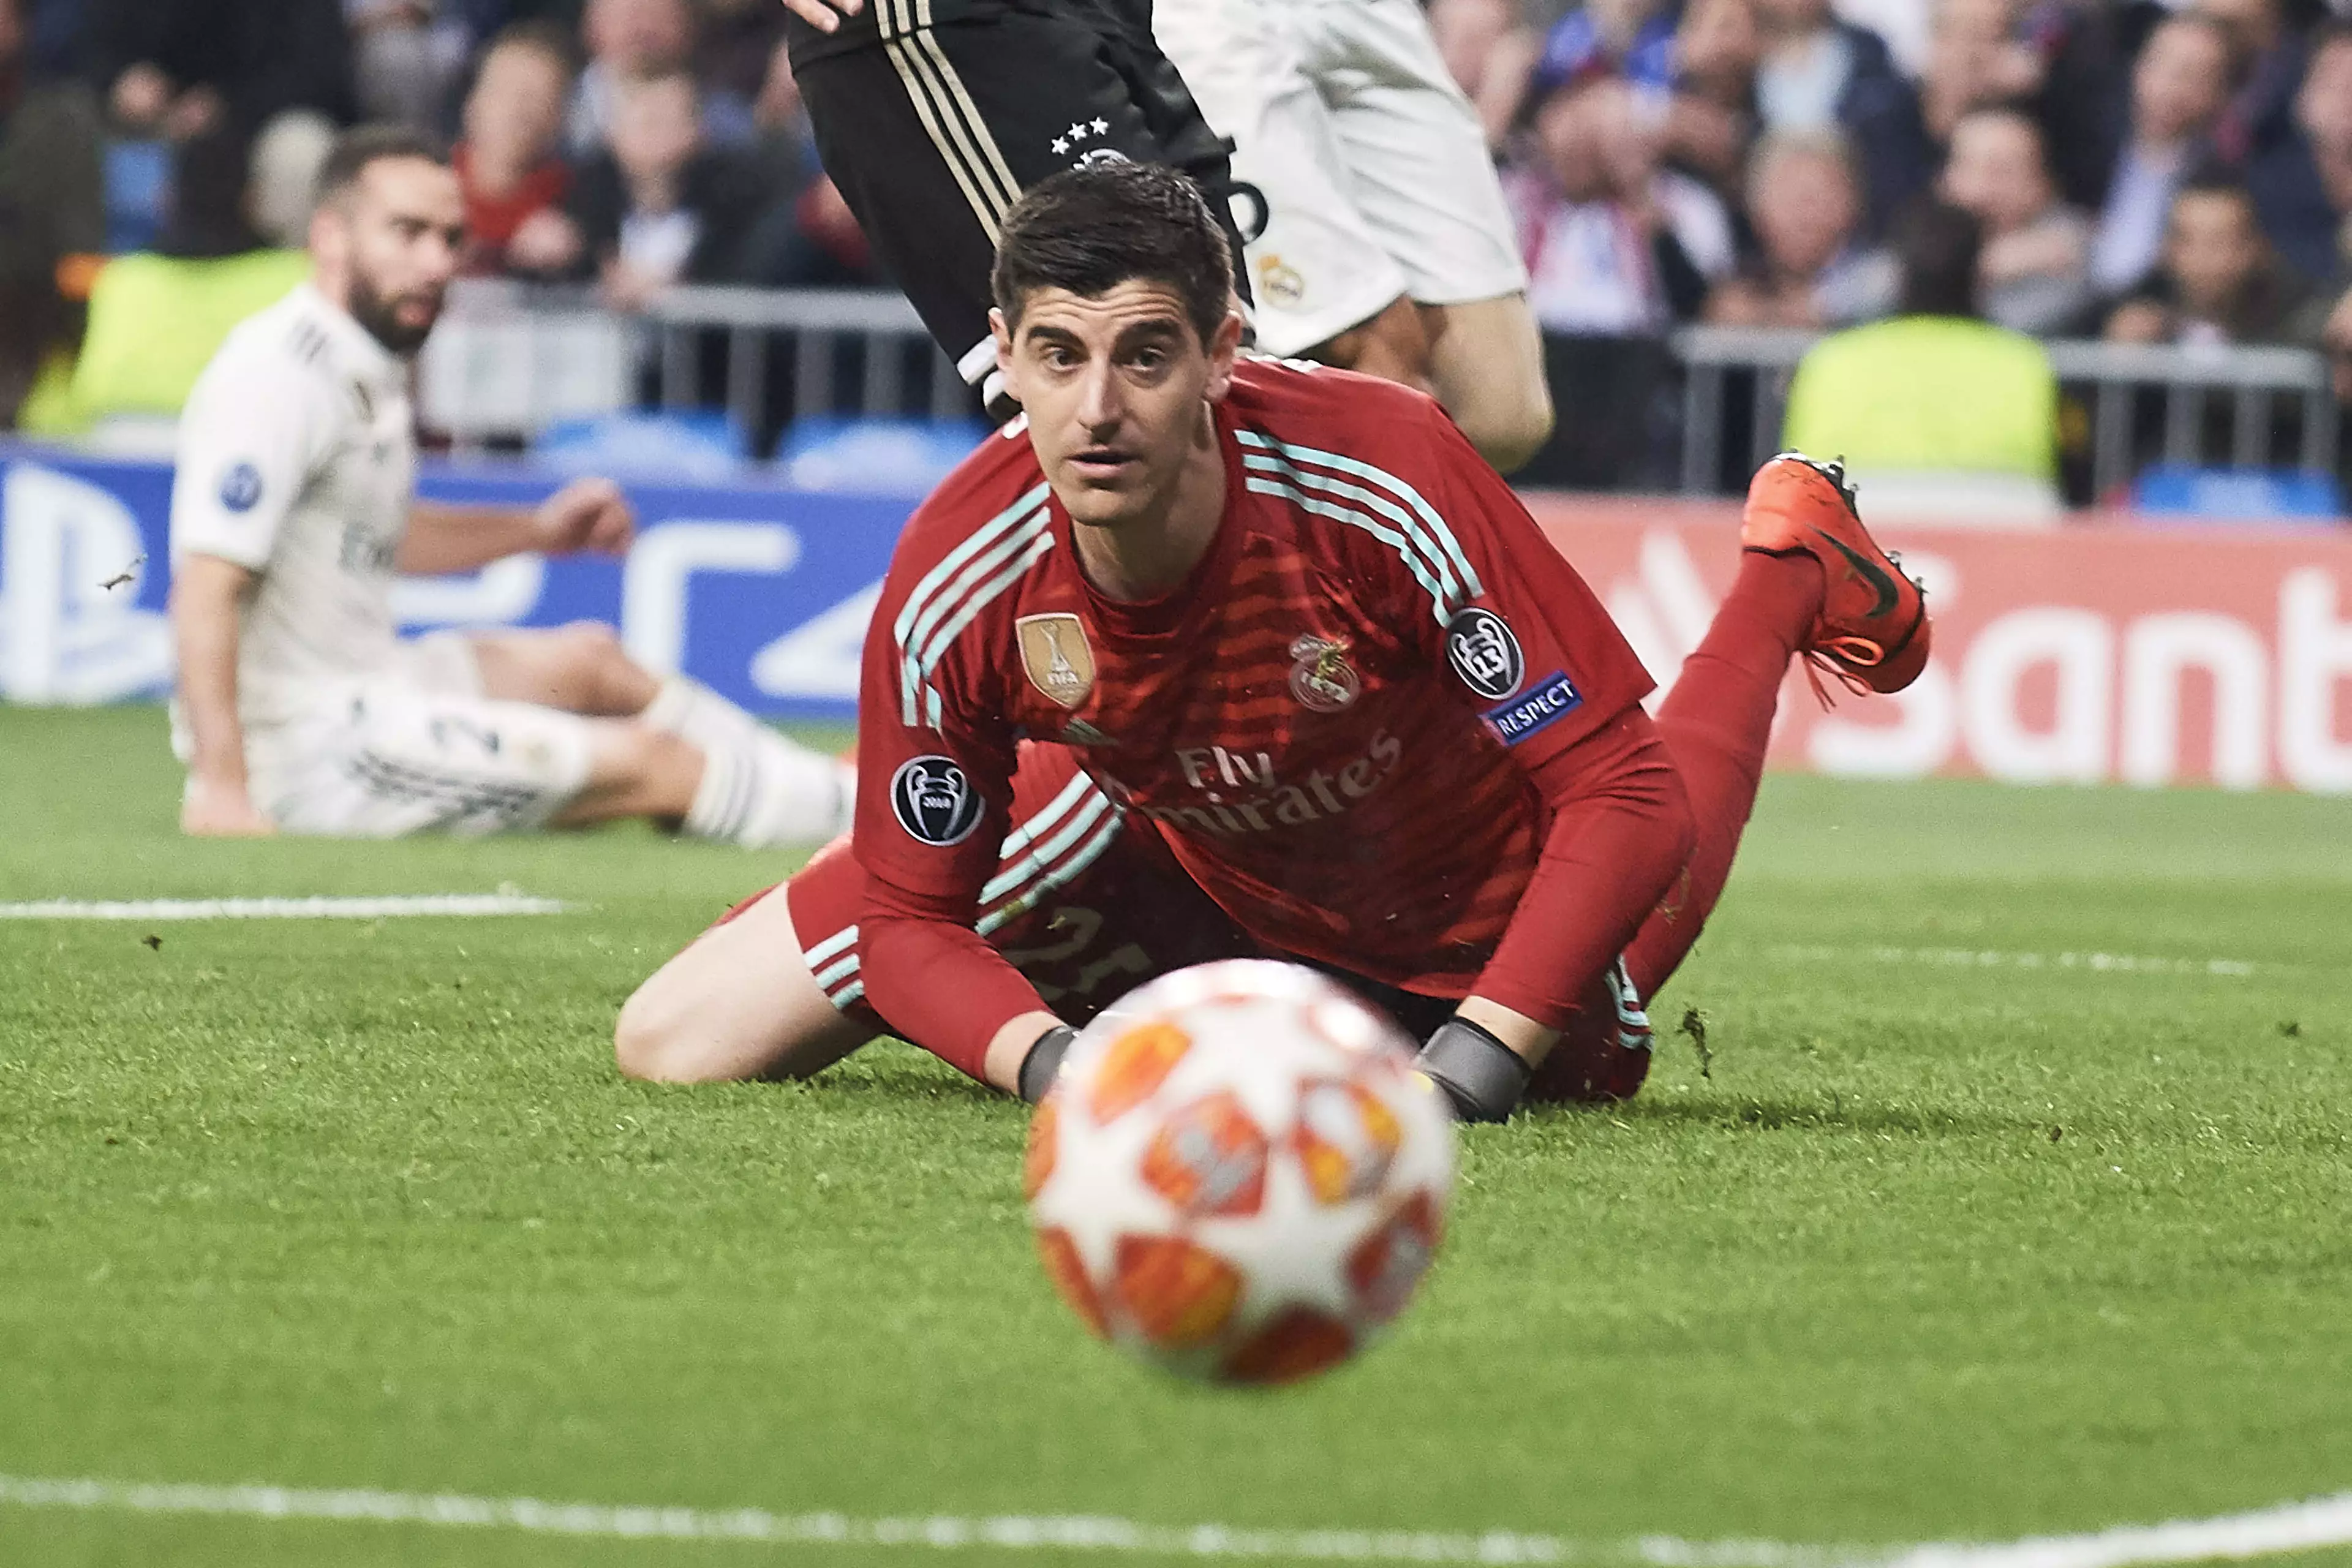 It's not been a good season all round for Courtois. Image: PA Images